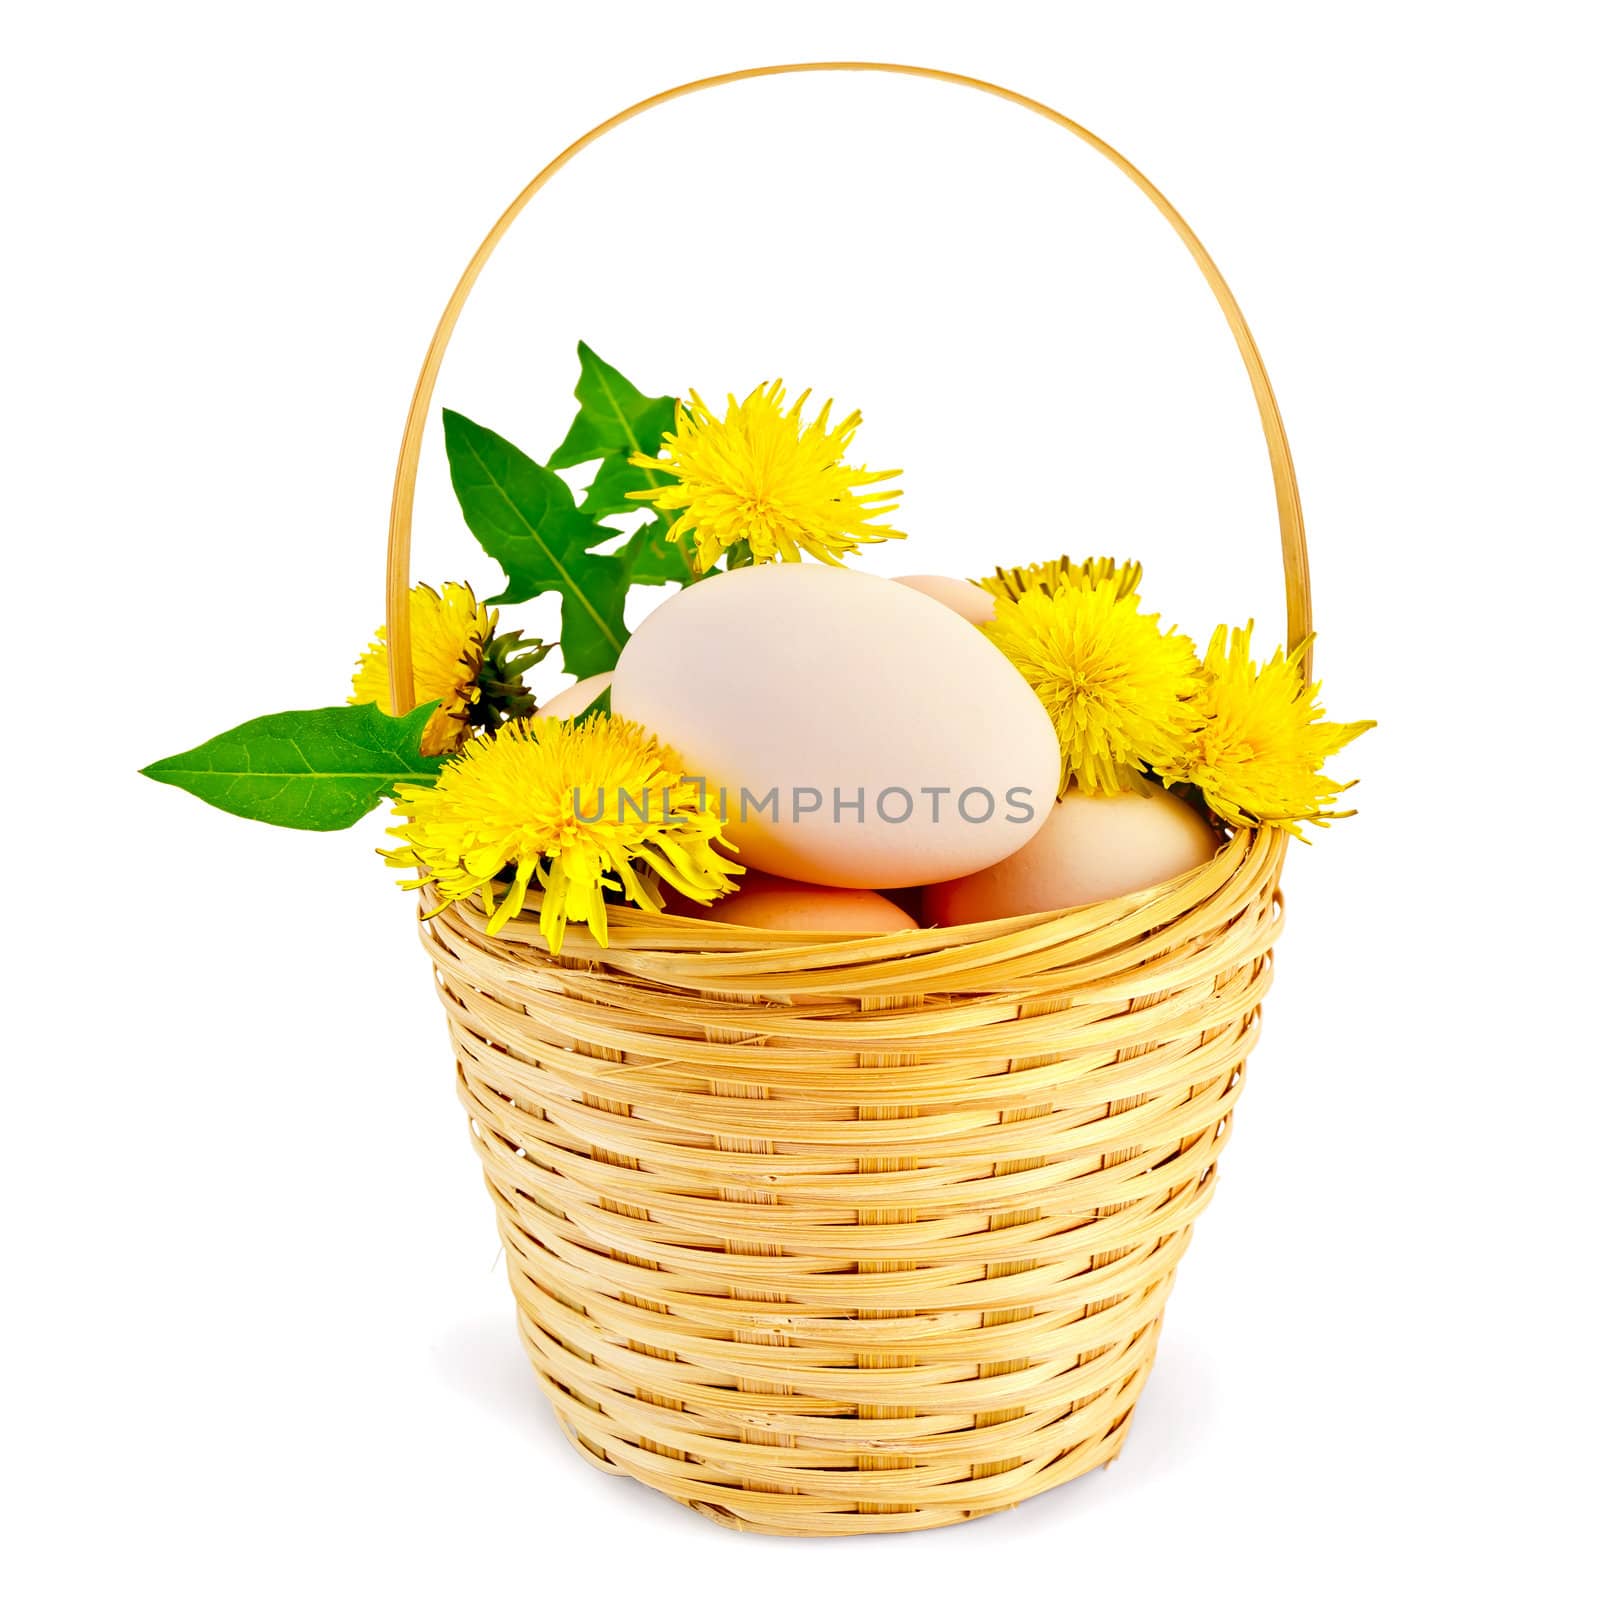 Eggs in a wicker basket with flowers and leaves of the dandelion is isolated on a white background